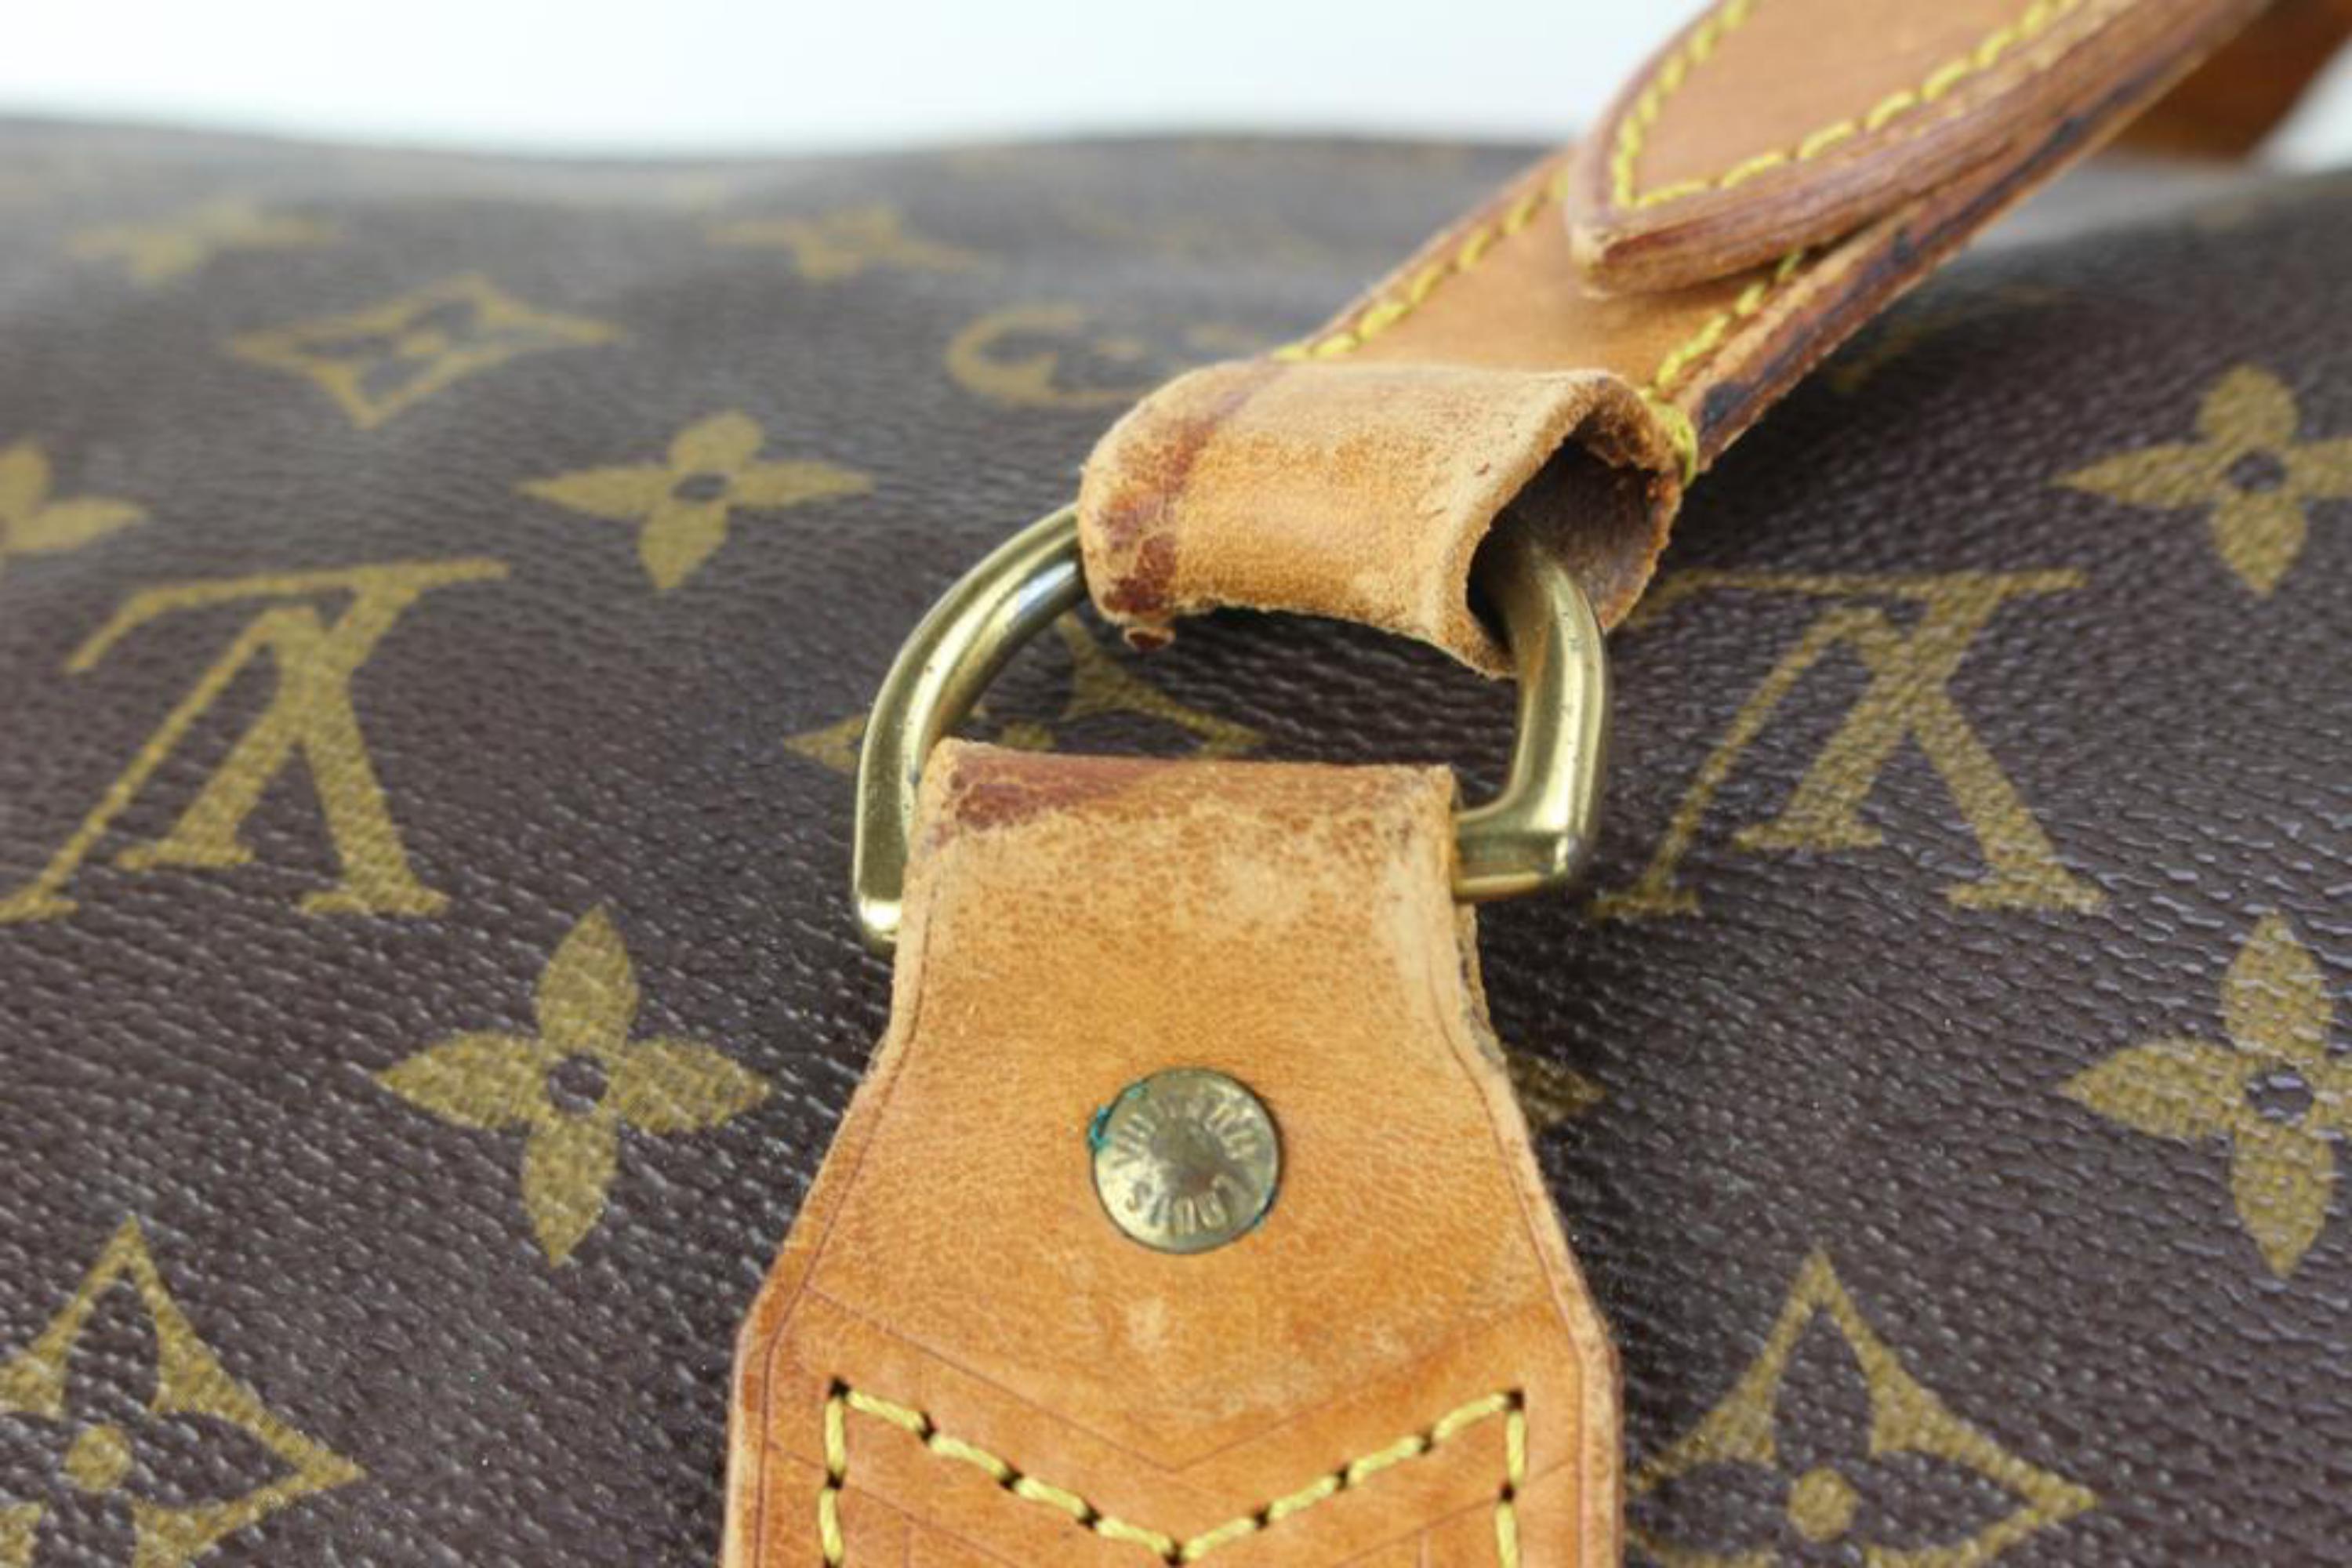 Louis Vuitton XL Monogram Sac Polochon 70 Keepall Bandouliere 64lz429s In Fair Condition For Sale In Dix hills, NY